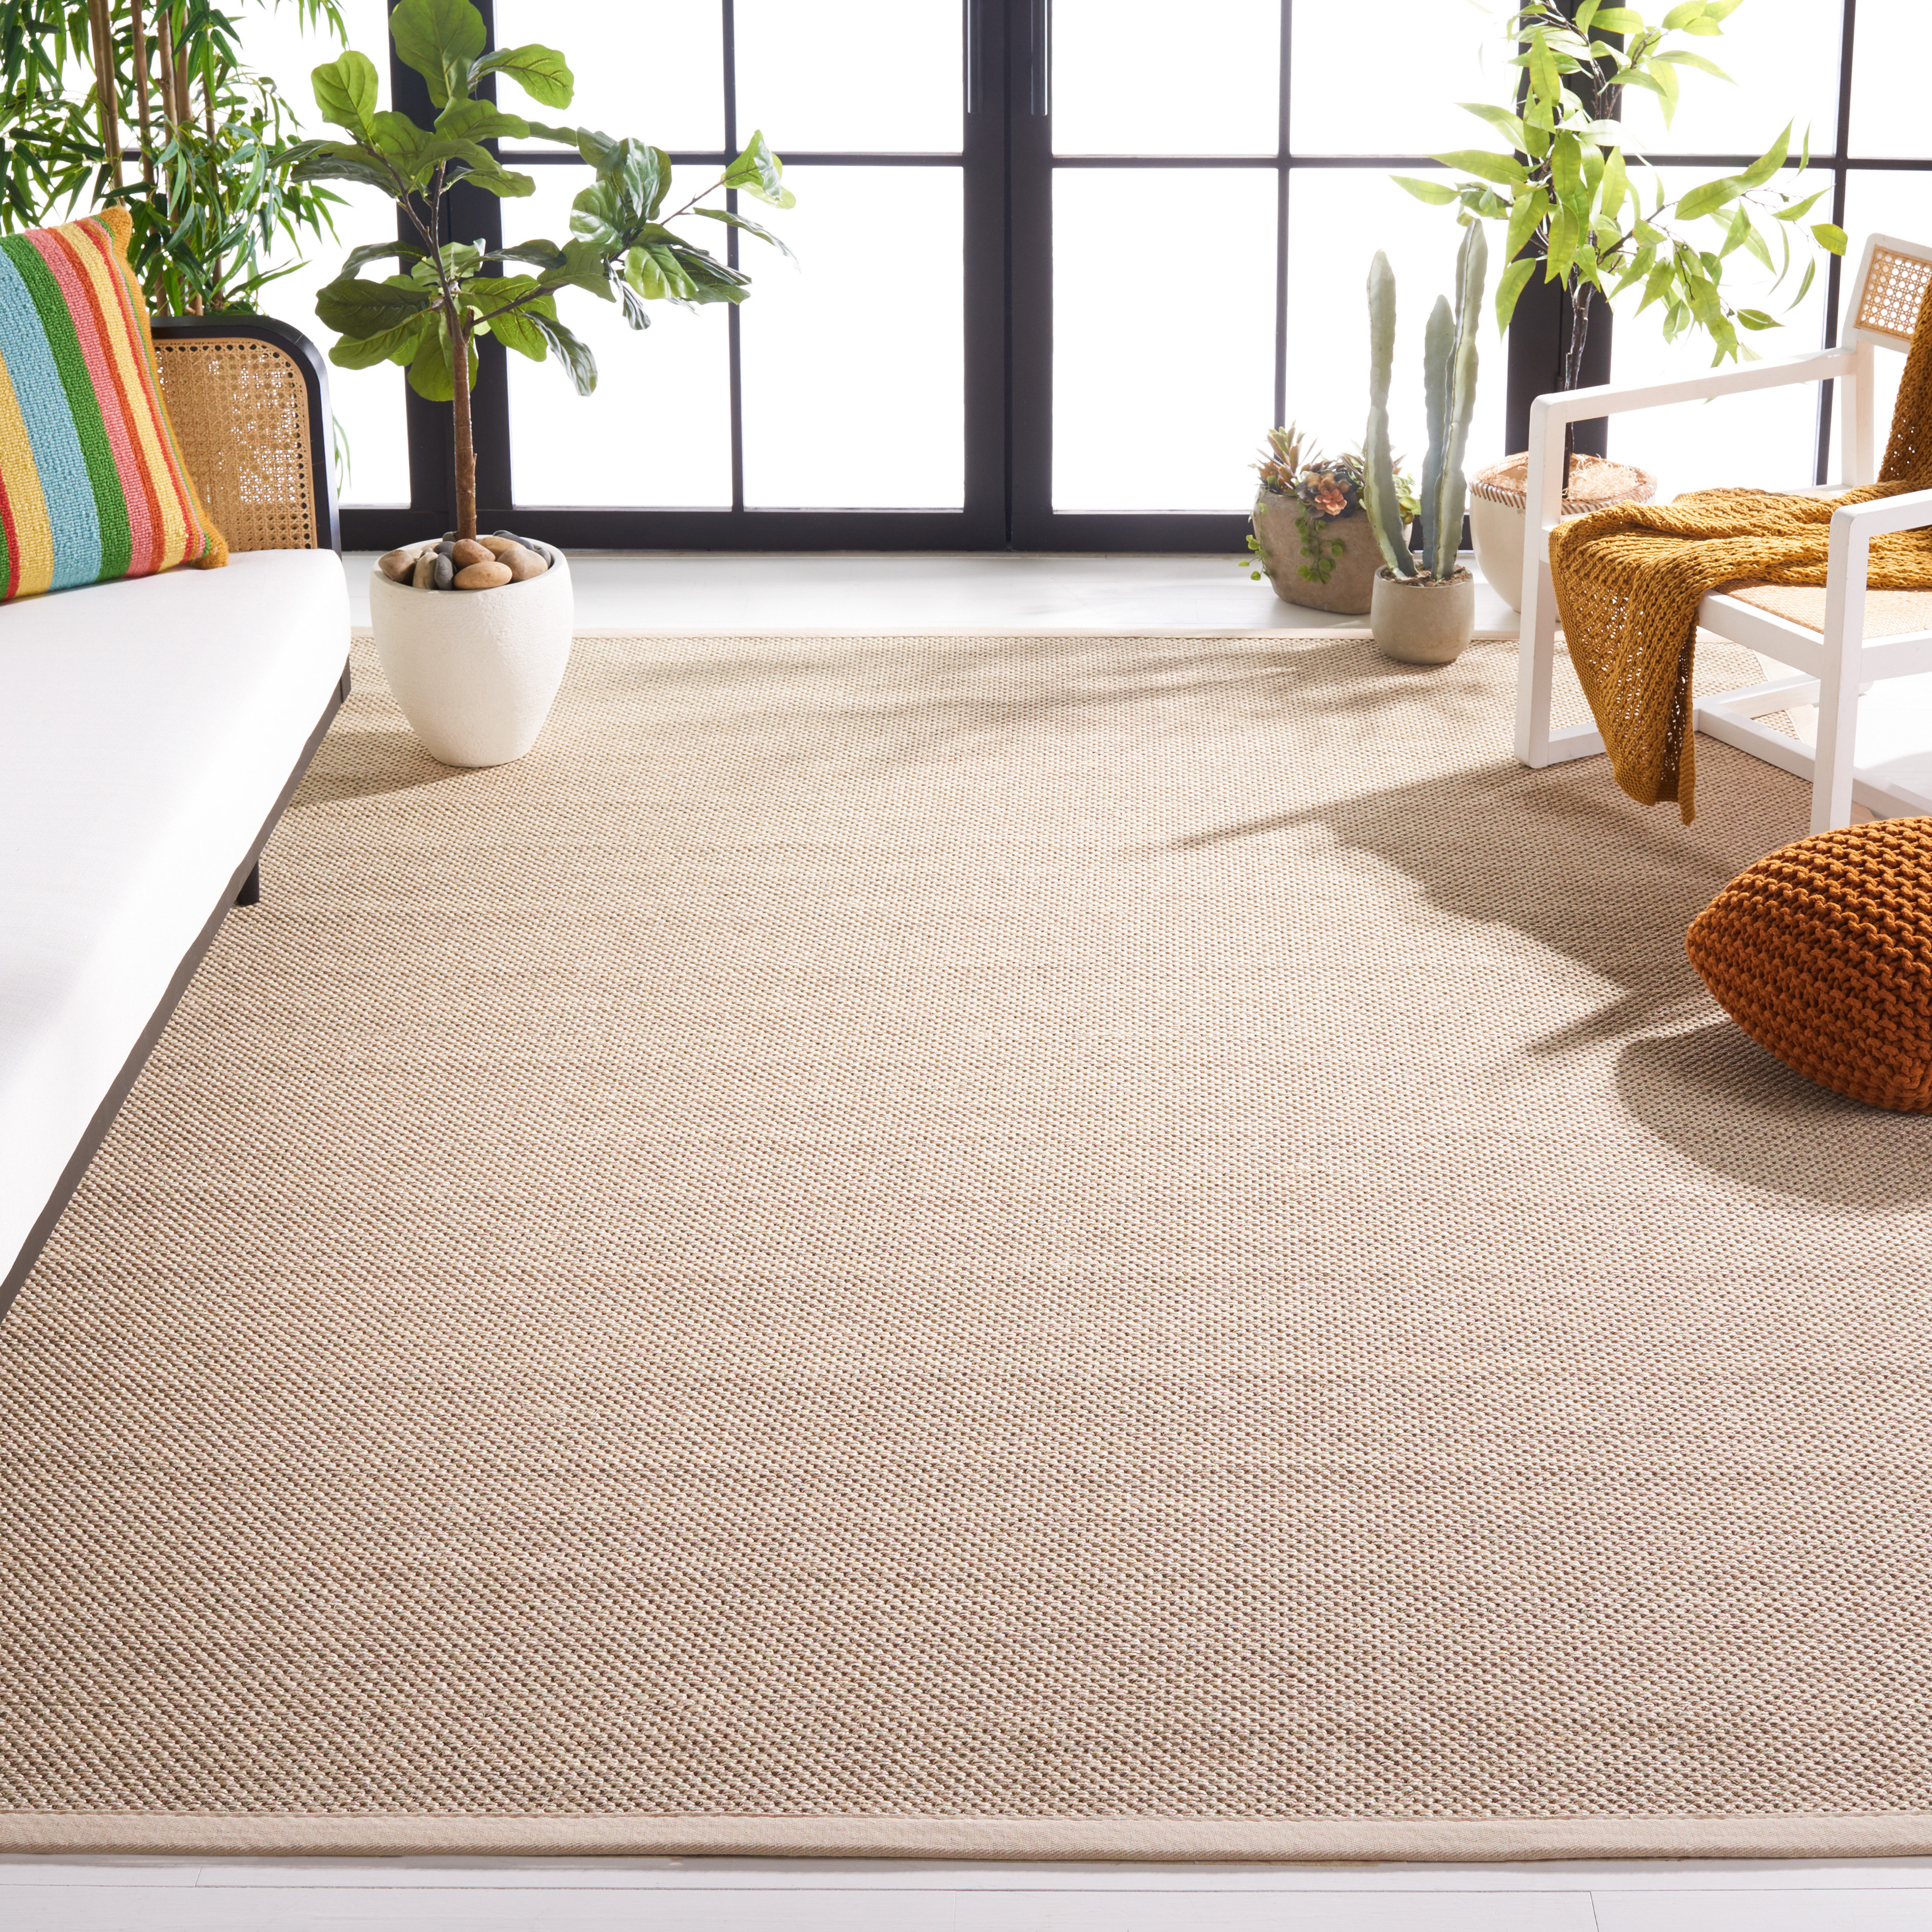 5 Great Rugs For Homes with Dogs: Canine-Compatible Carpet